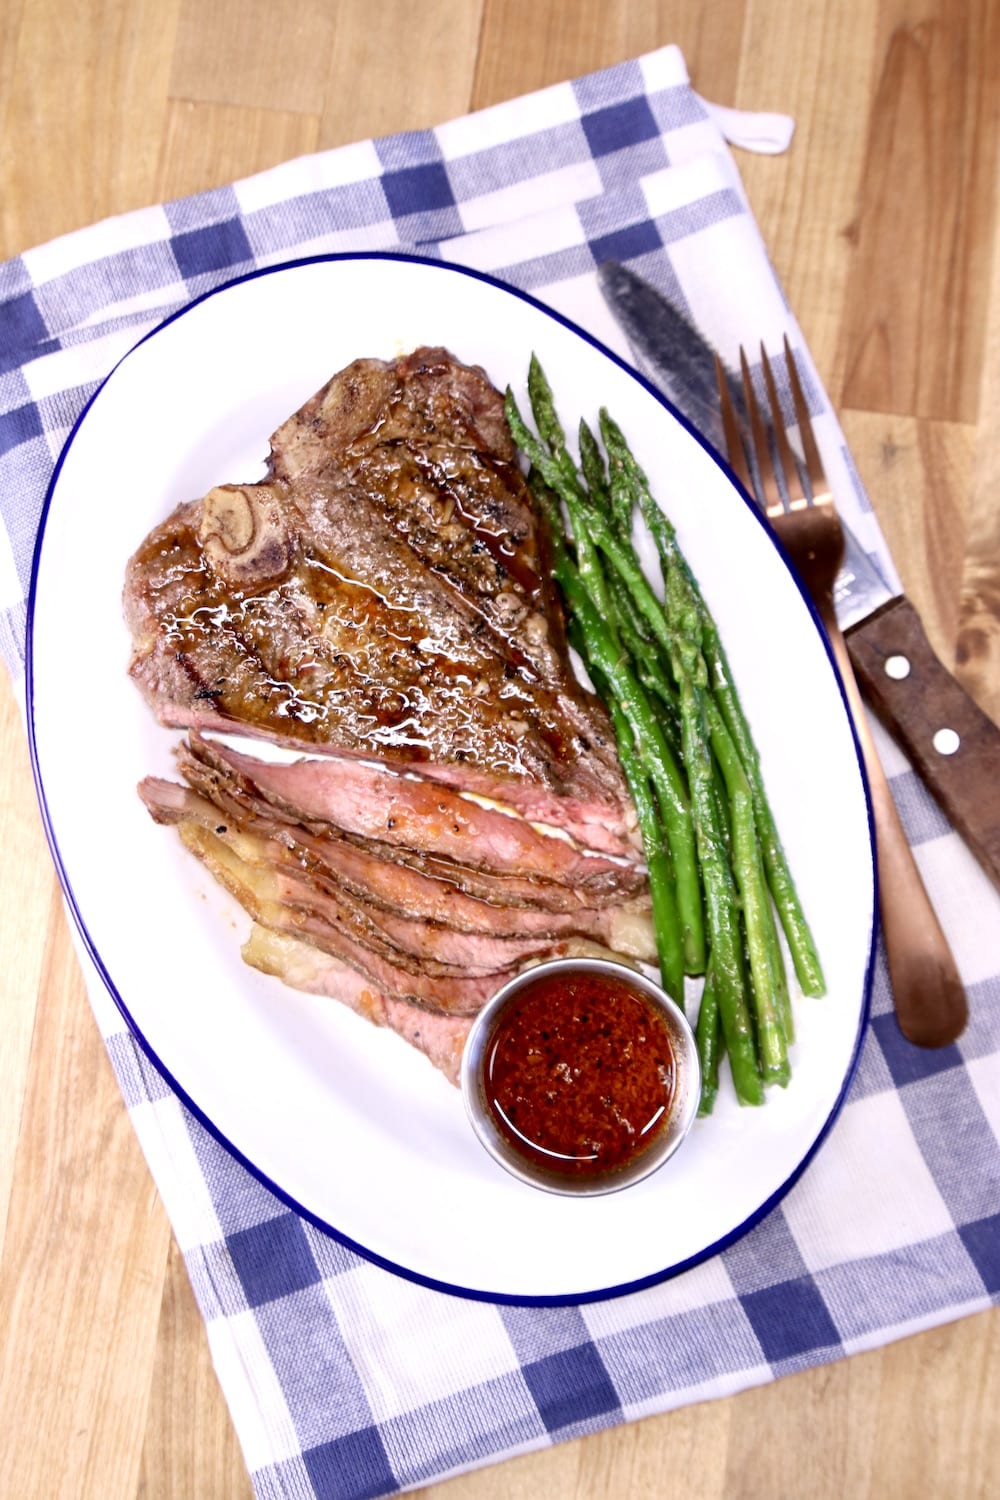 Plate of steak and asparagus with cup of sauce. Knife, fork and napkin